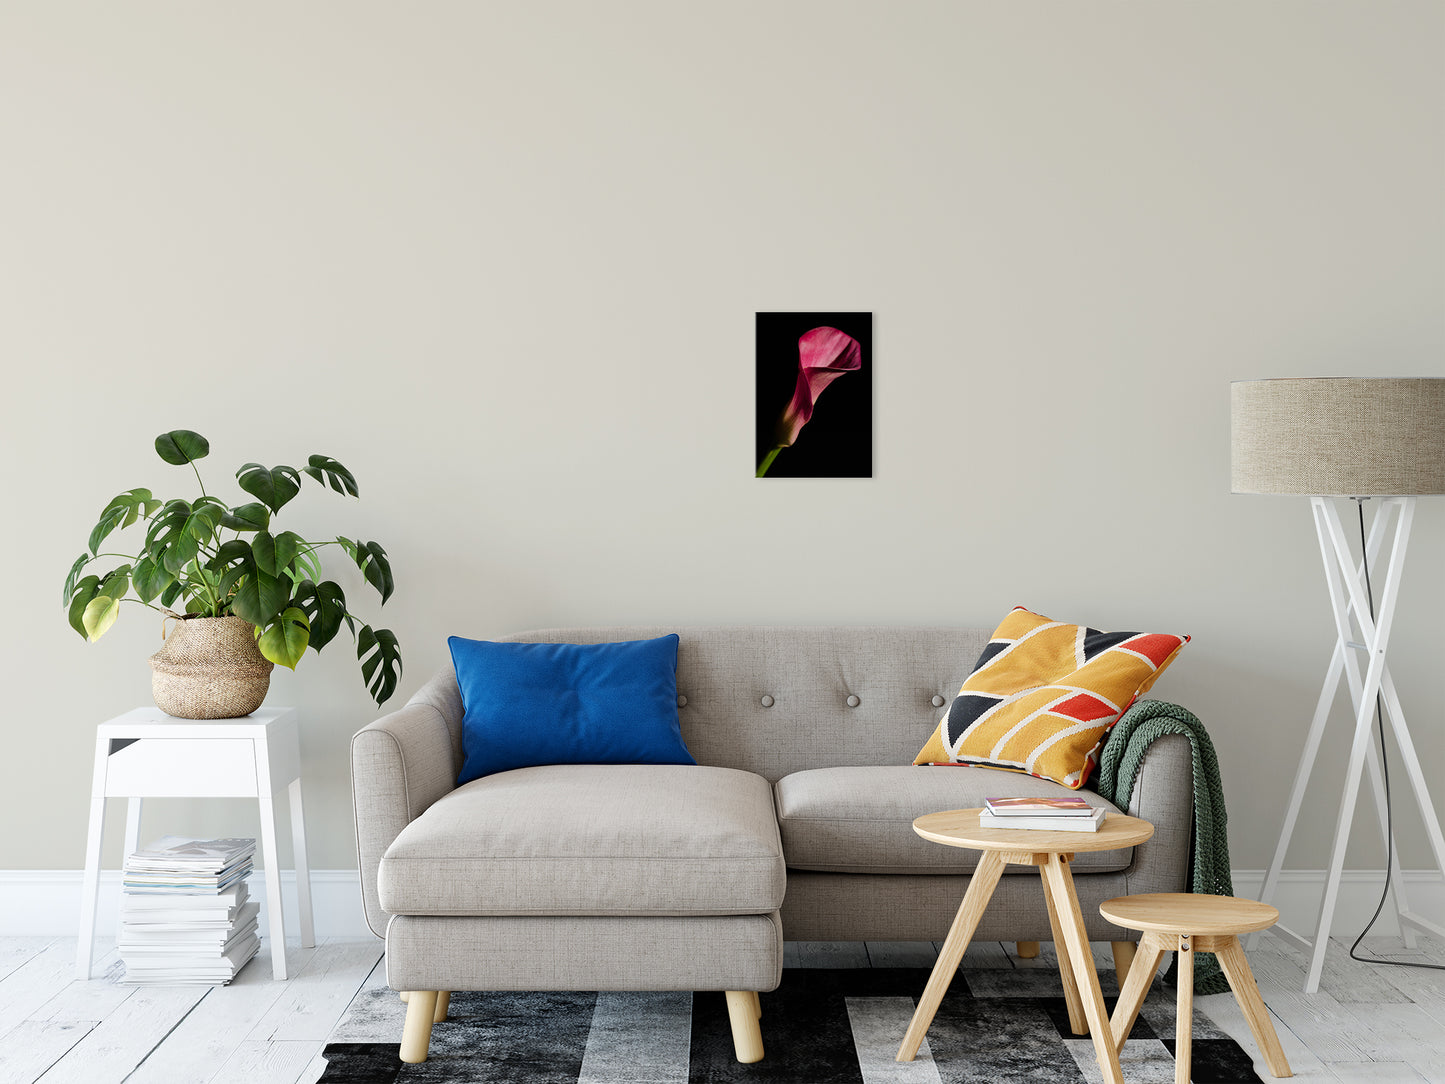 Pink Calla Lily Flower on Black Nature / Floral Photo Fine Art Canvas Wall Art Prints 11" x 14" - PIPAFINEART